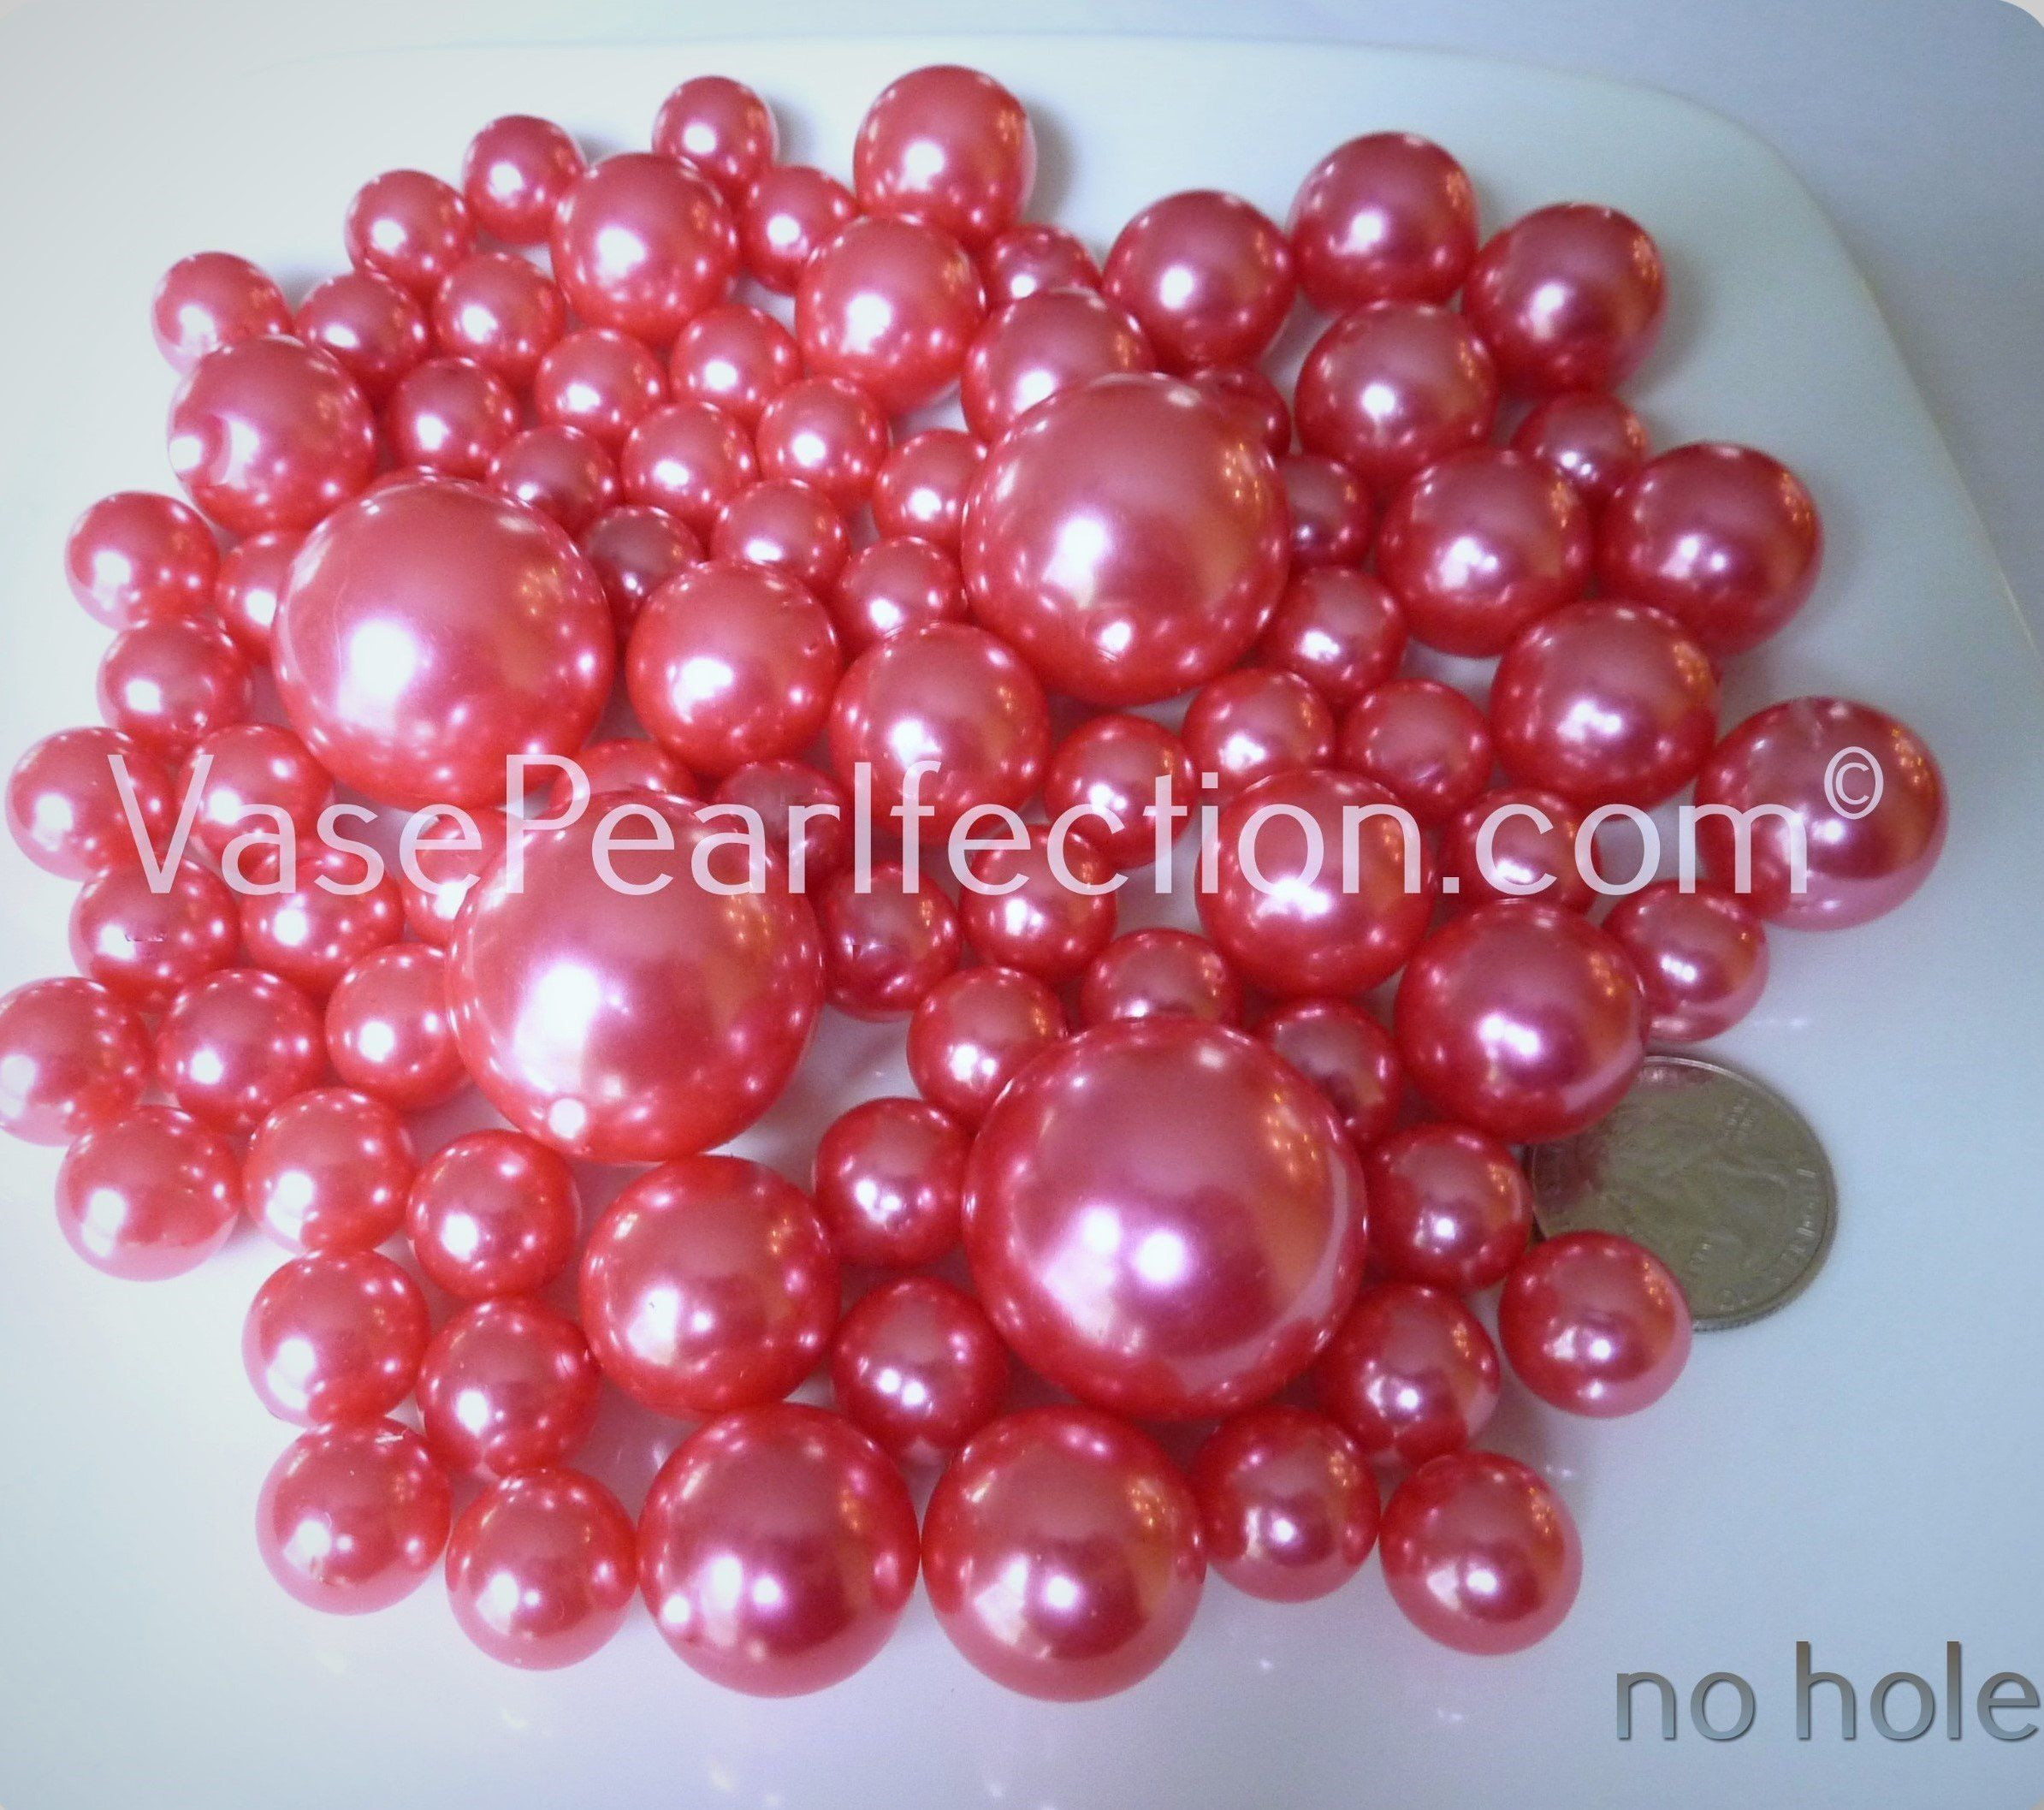 pearl vase fillers weddings of all red pearls jumbo assorted sizes vase fillers for dec inside no hole 80 all coral pink pearls jumbo assorted sizes vase fillers for decorating